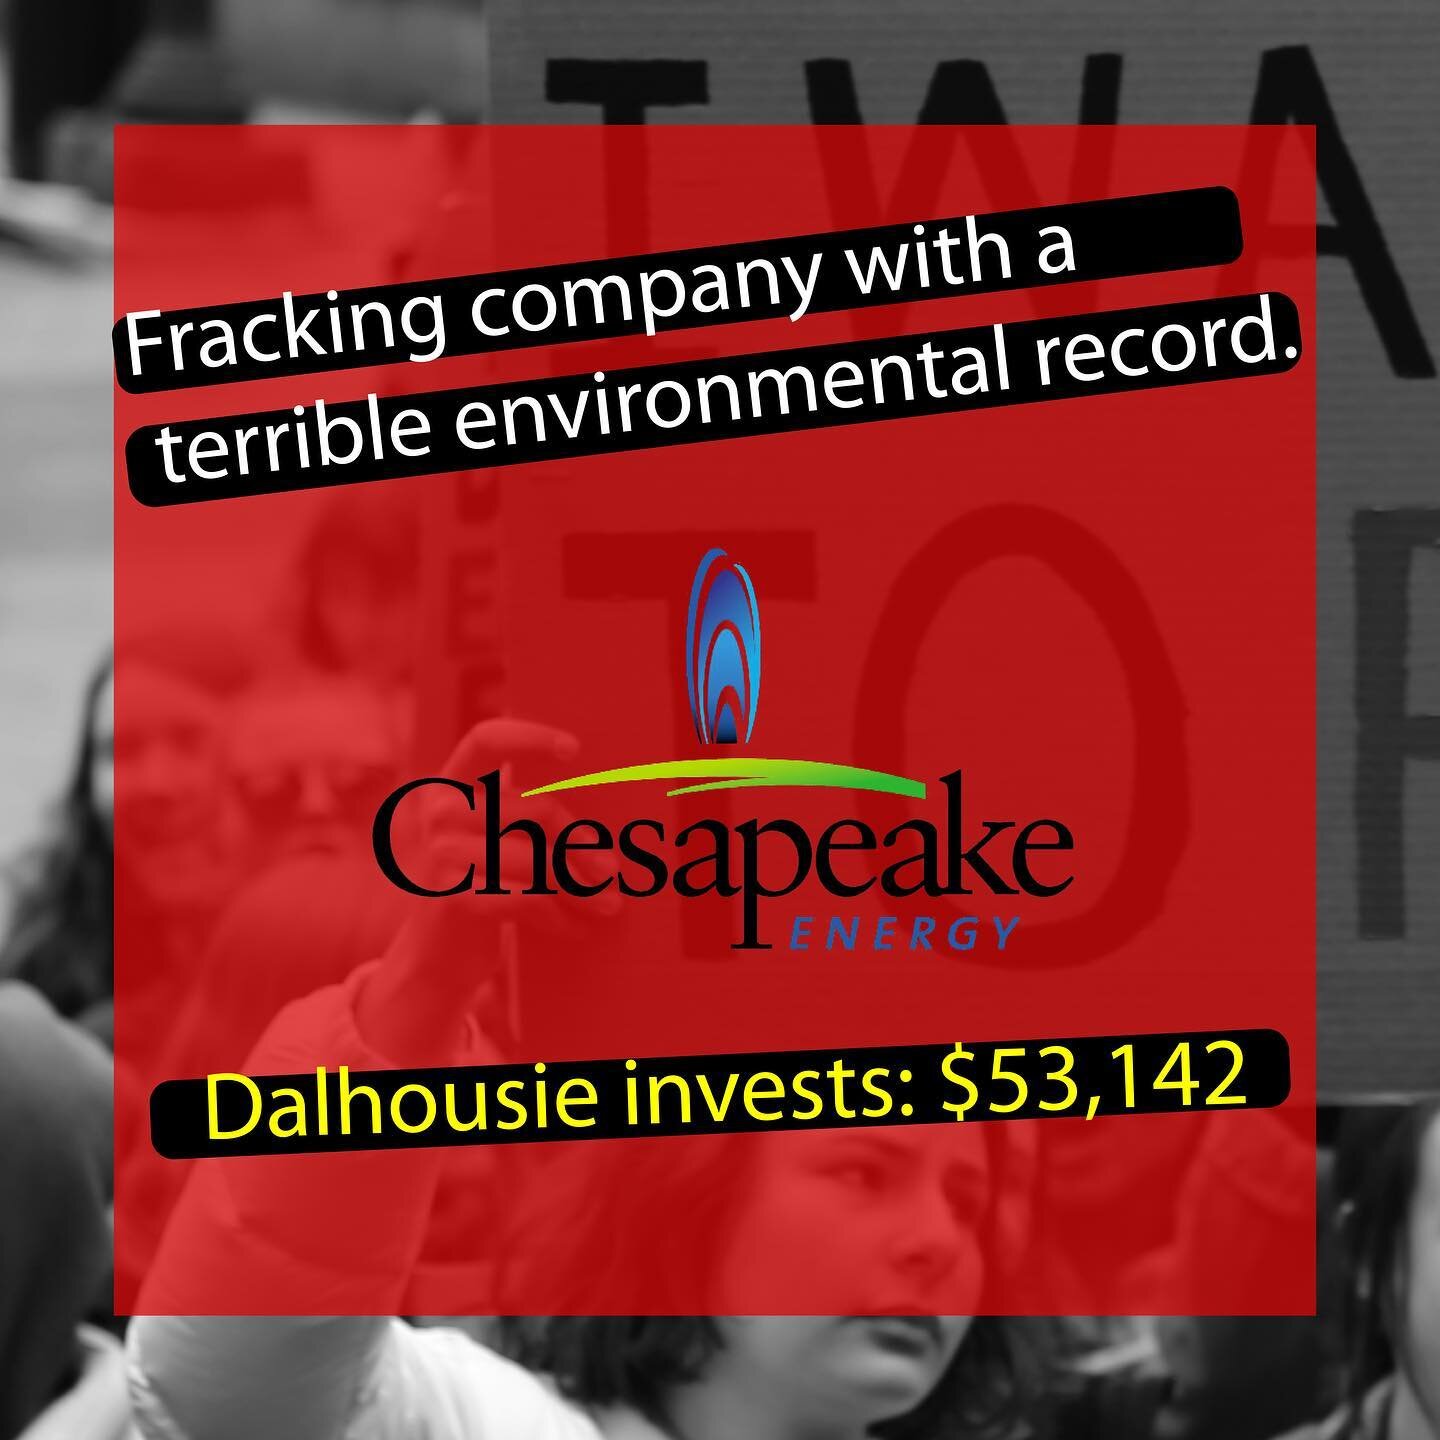 @chesapeake is a low ESG performer even among its peer companies. ITS A FRACKING COMPANY. Even in the fracking biz, this corporation can&rsquo;t keep up. This kind of investment should be the first ejected from Dalhousie&rsquo;s endowment. It&rsquo;s